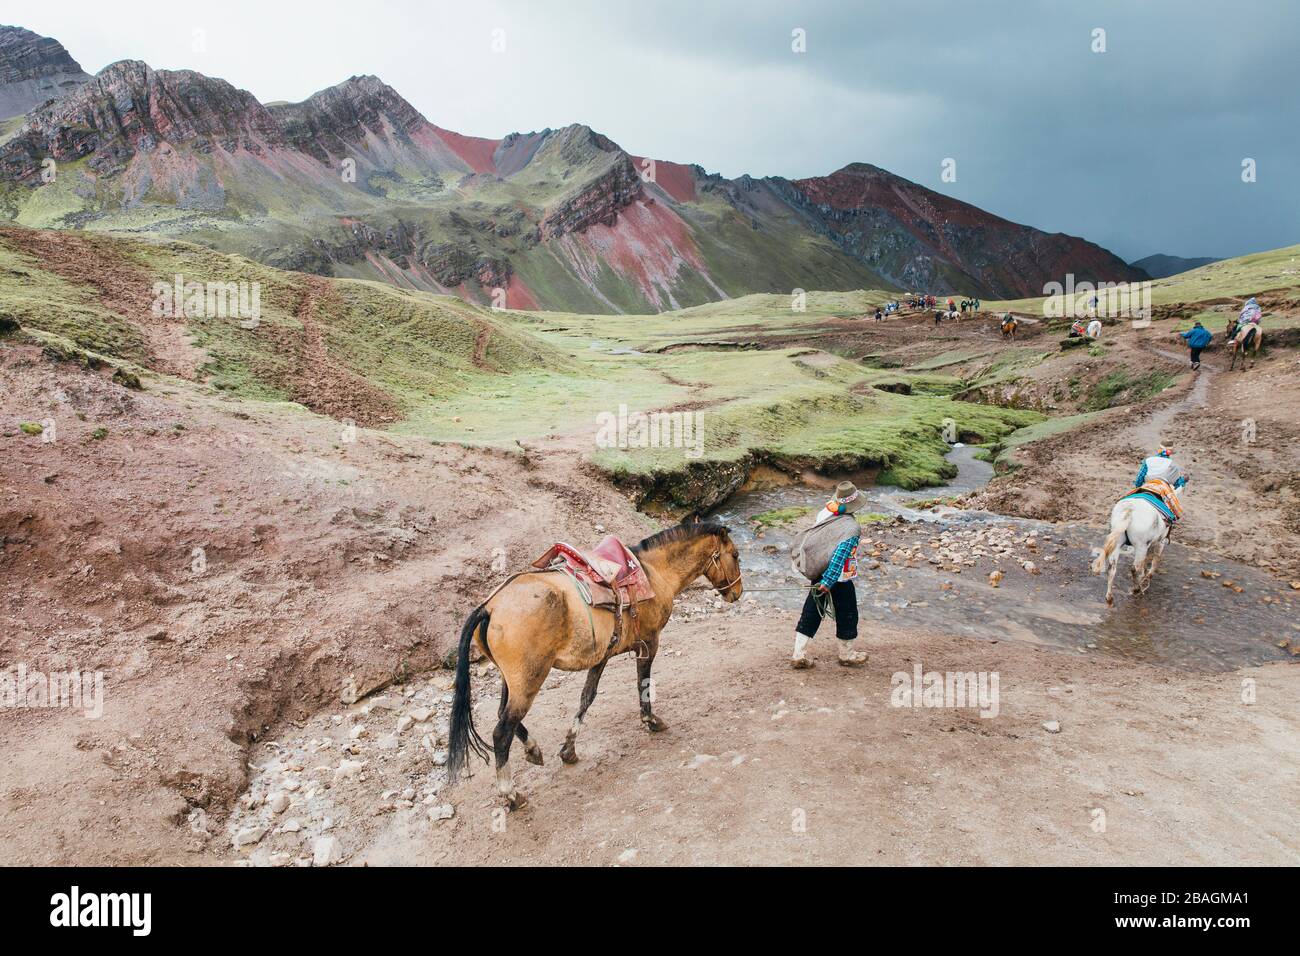 Local guides with horses are going down to the valley, Peru Stock Photo